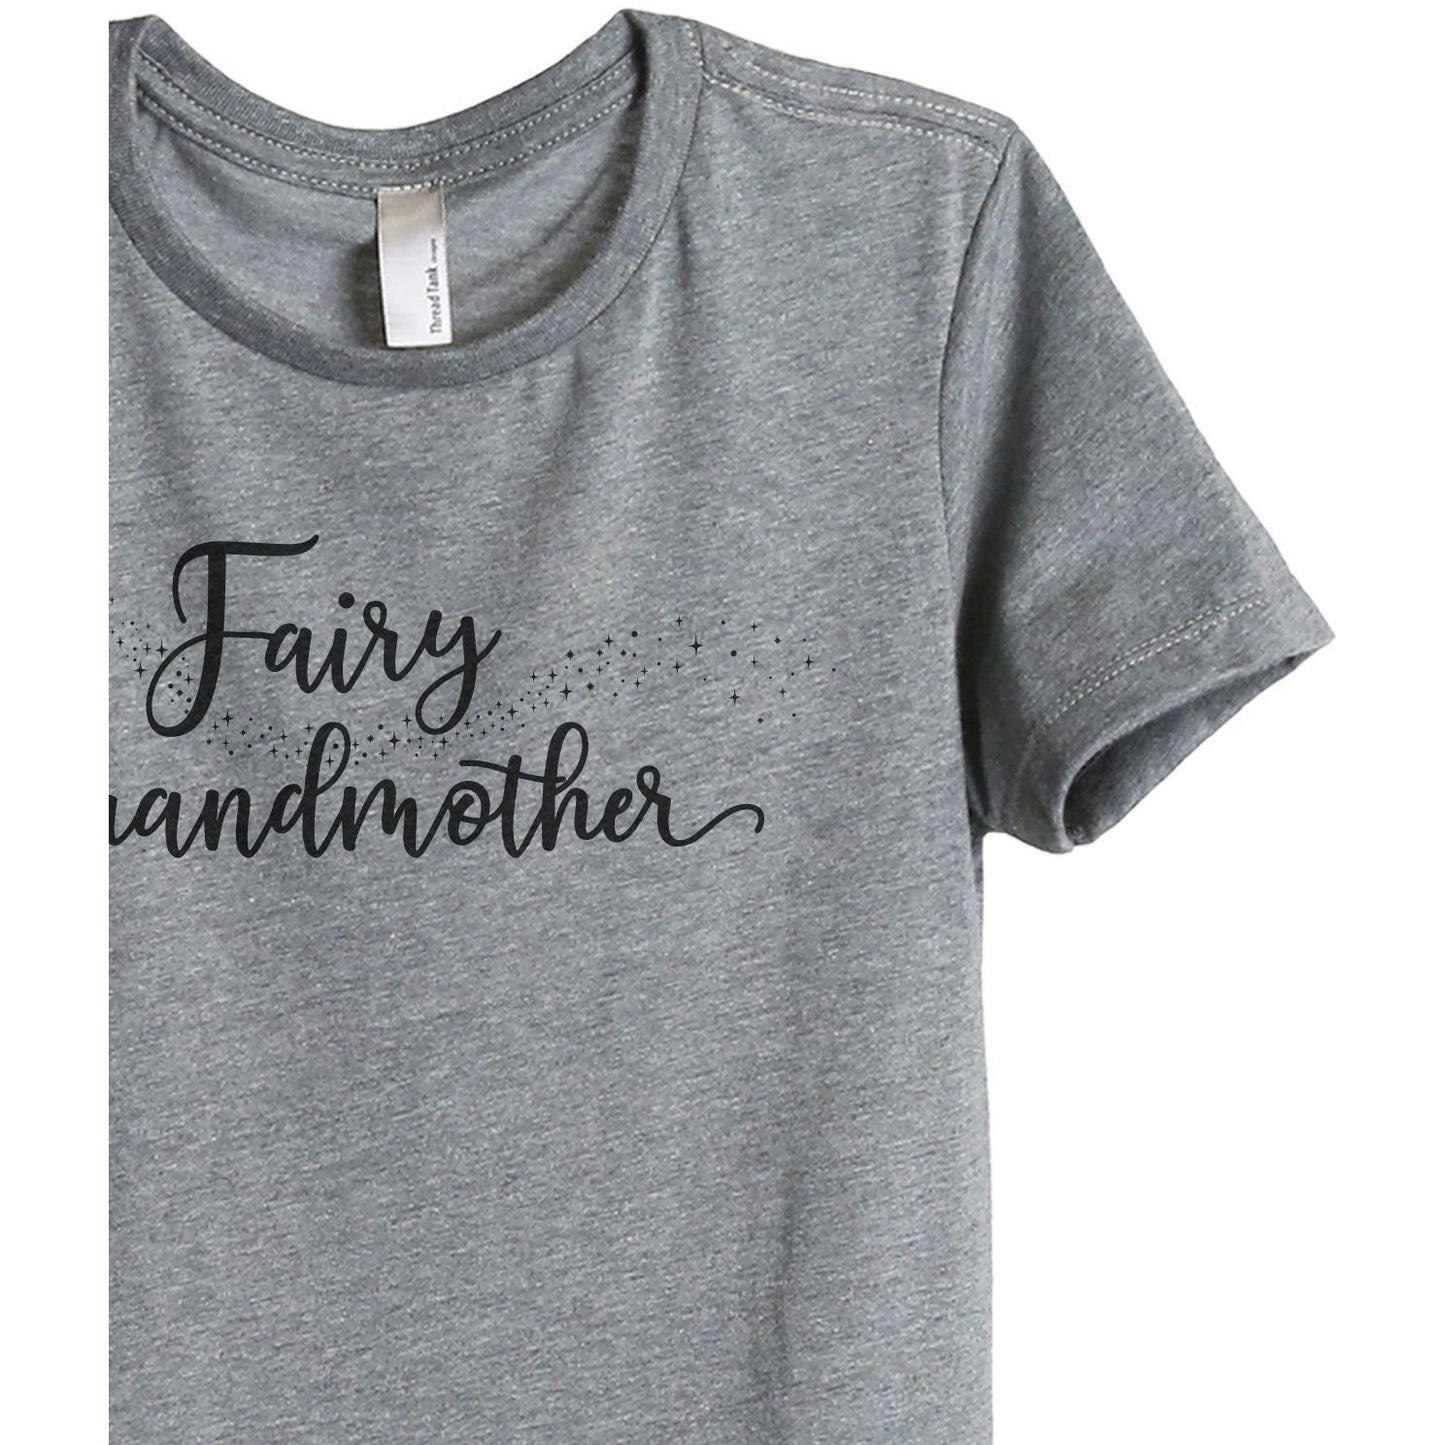 Fairy Grandmother Women's Relaxed Crewneck T-Shirt Top Tee Heather Grey Zoom Details
